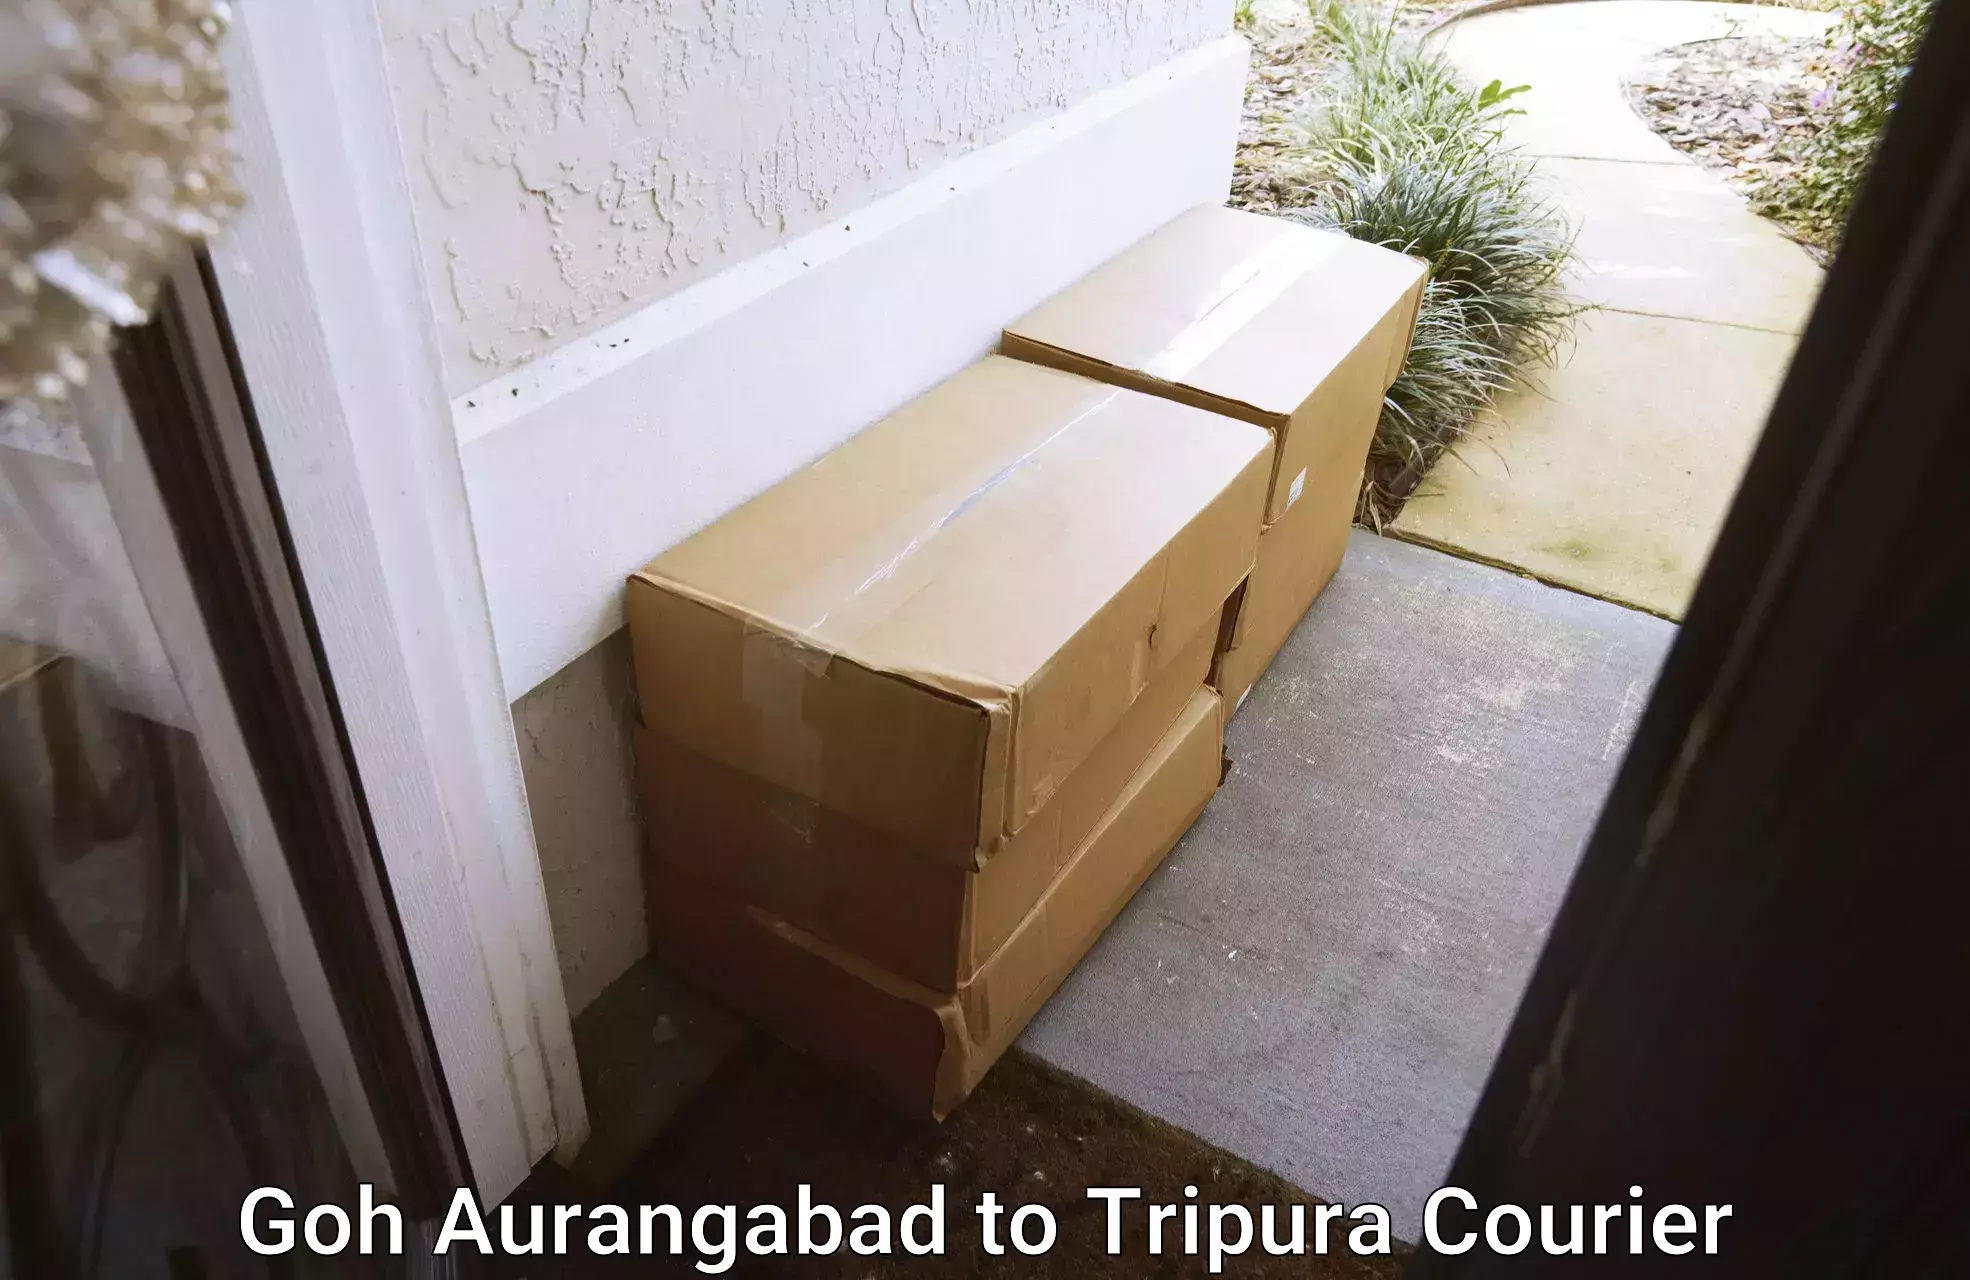 Trusted relocation services Goh Aurangabad to Aambasa